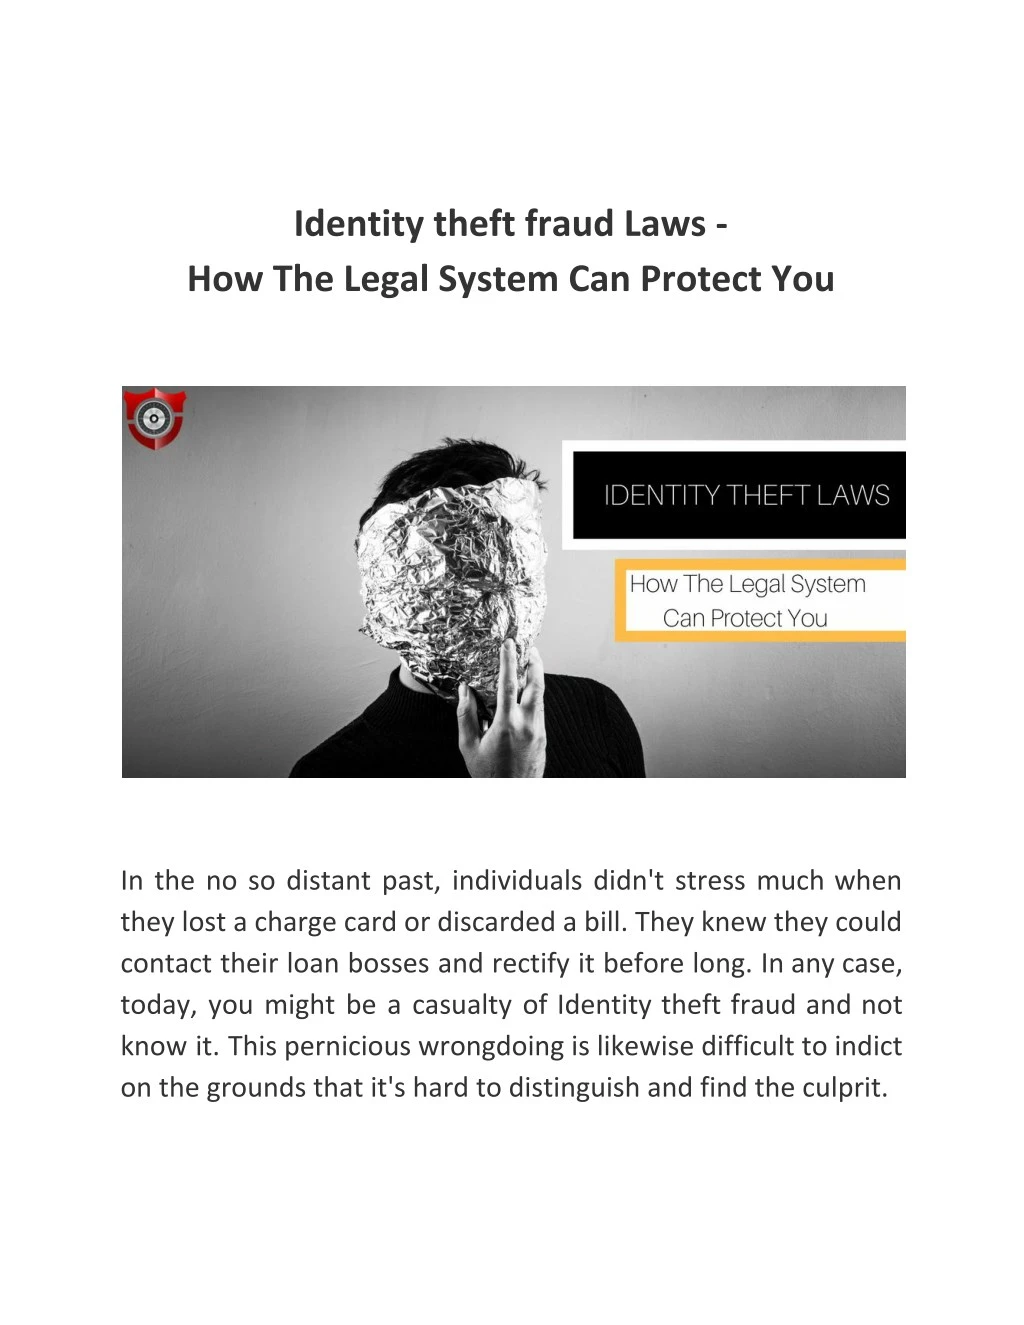 identity theft fraud laws how the legal system